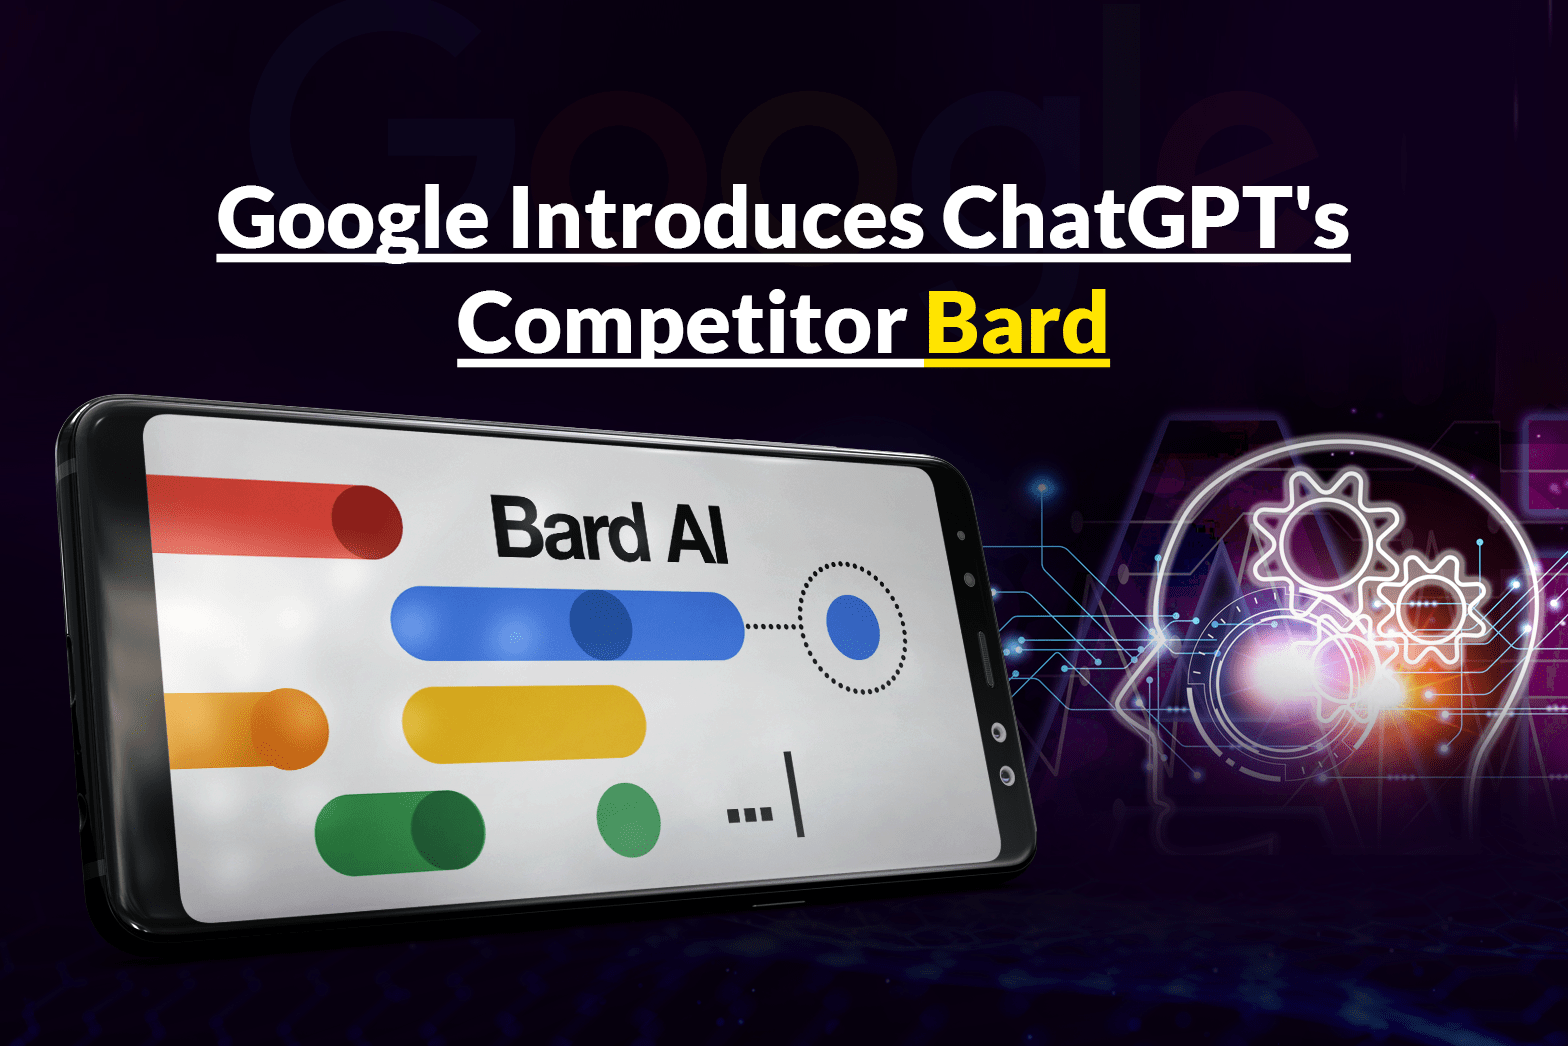 Google Introduces ChatGPT’s Competitor Bard